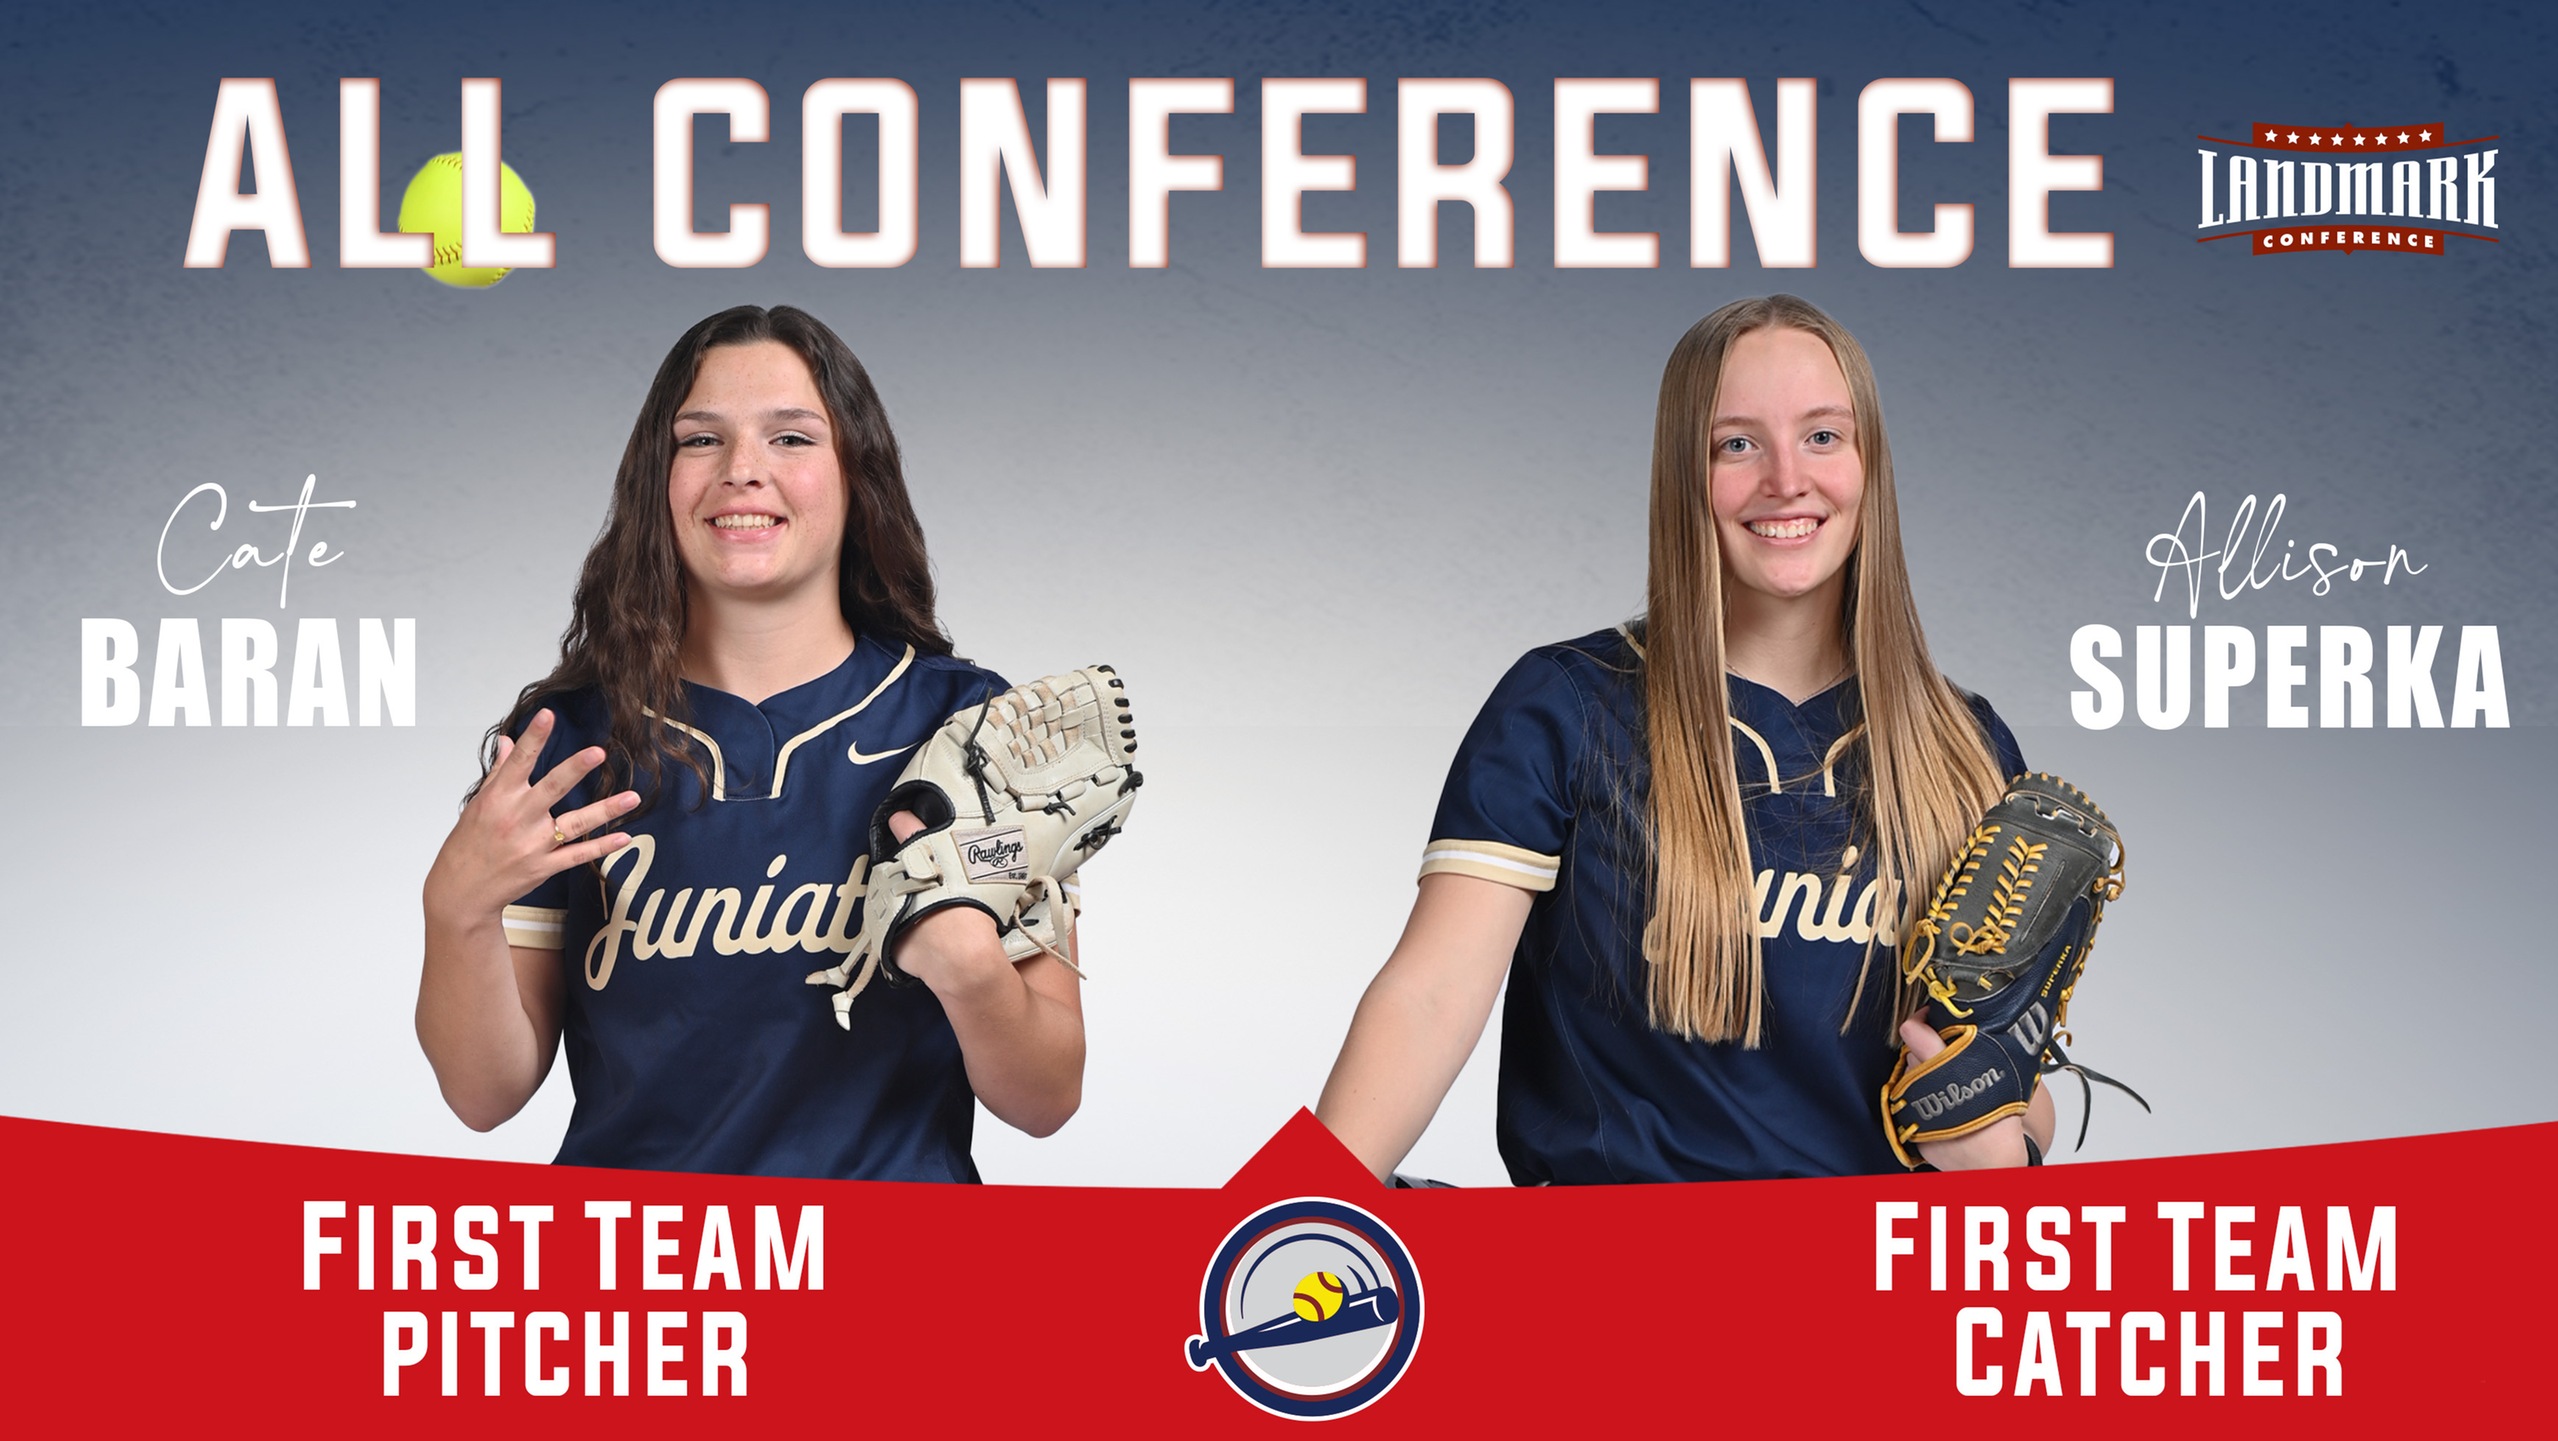 Baran and Superka Named to Landmark All-Conference First Team, Garlock Leads Coaching Staff of the Year